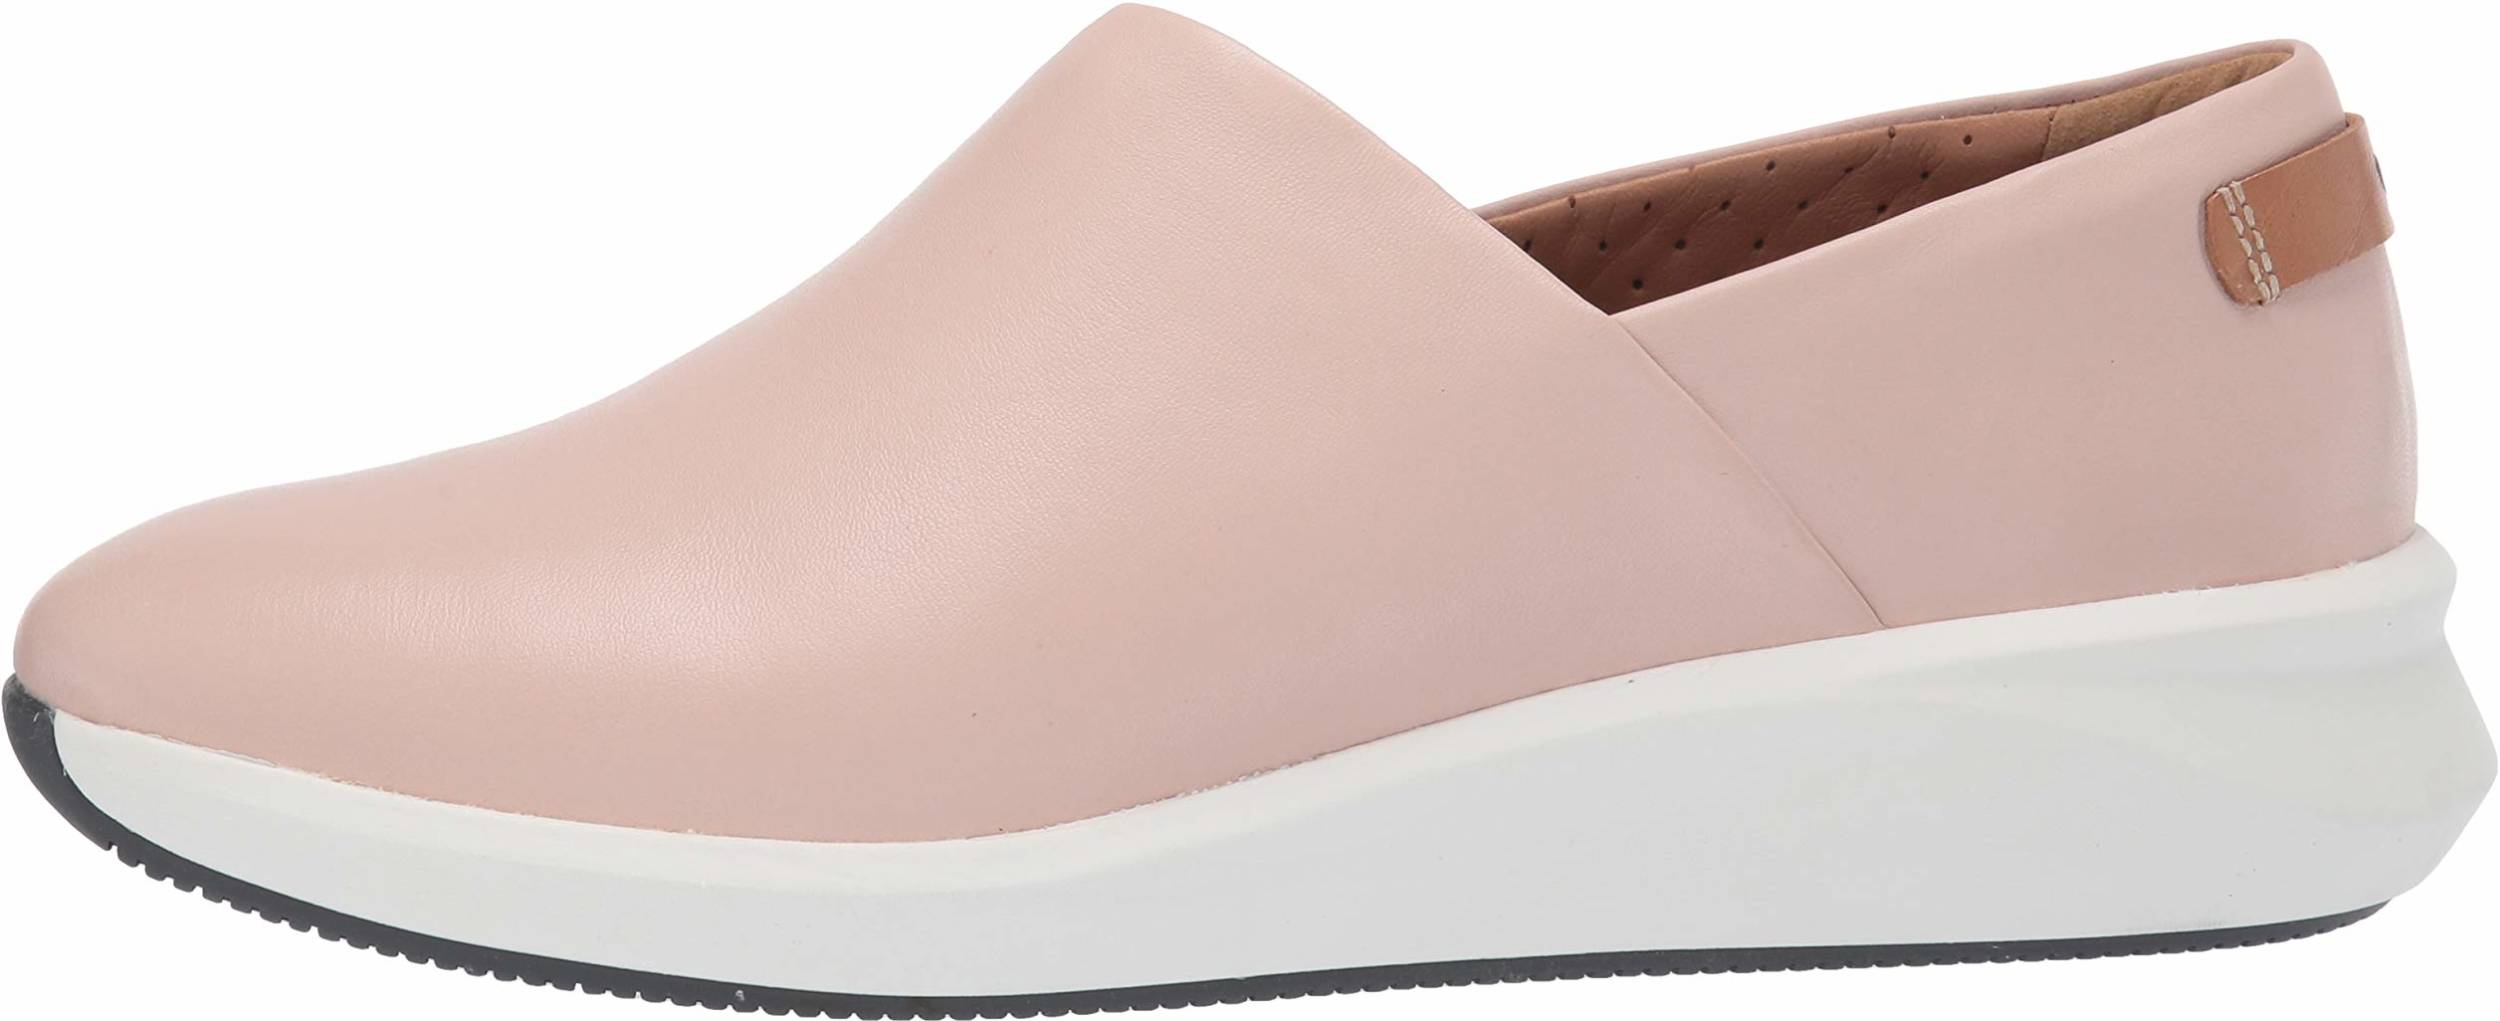 clarks blush pink shoes